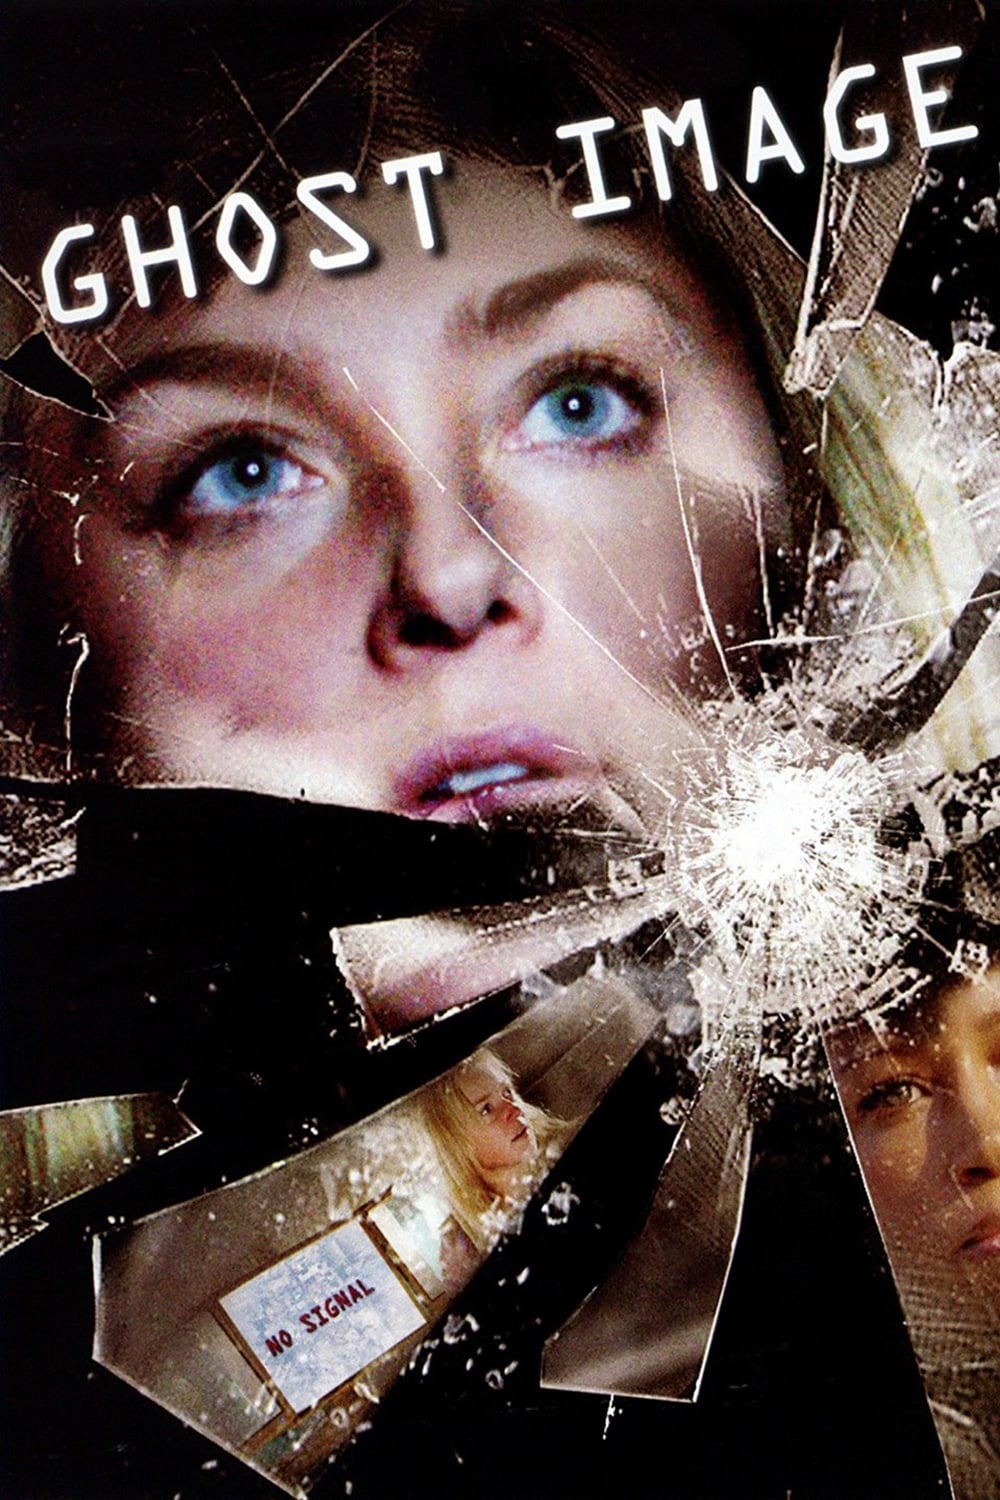 Ghost Image (2007)